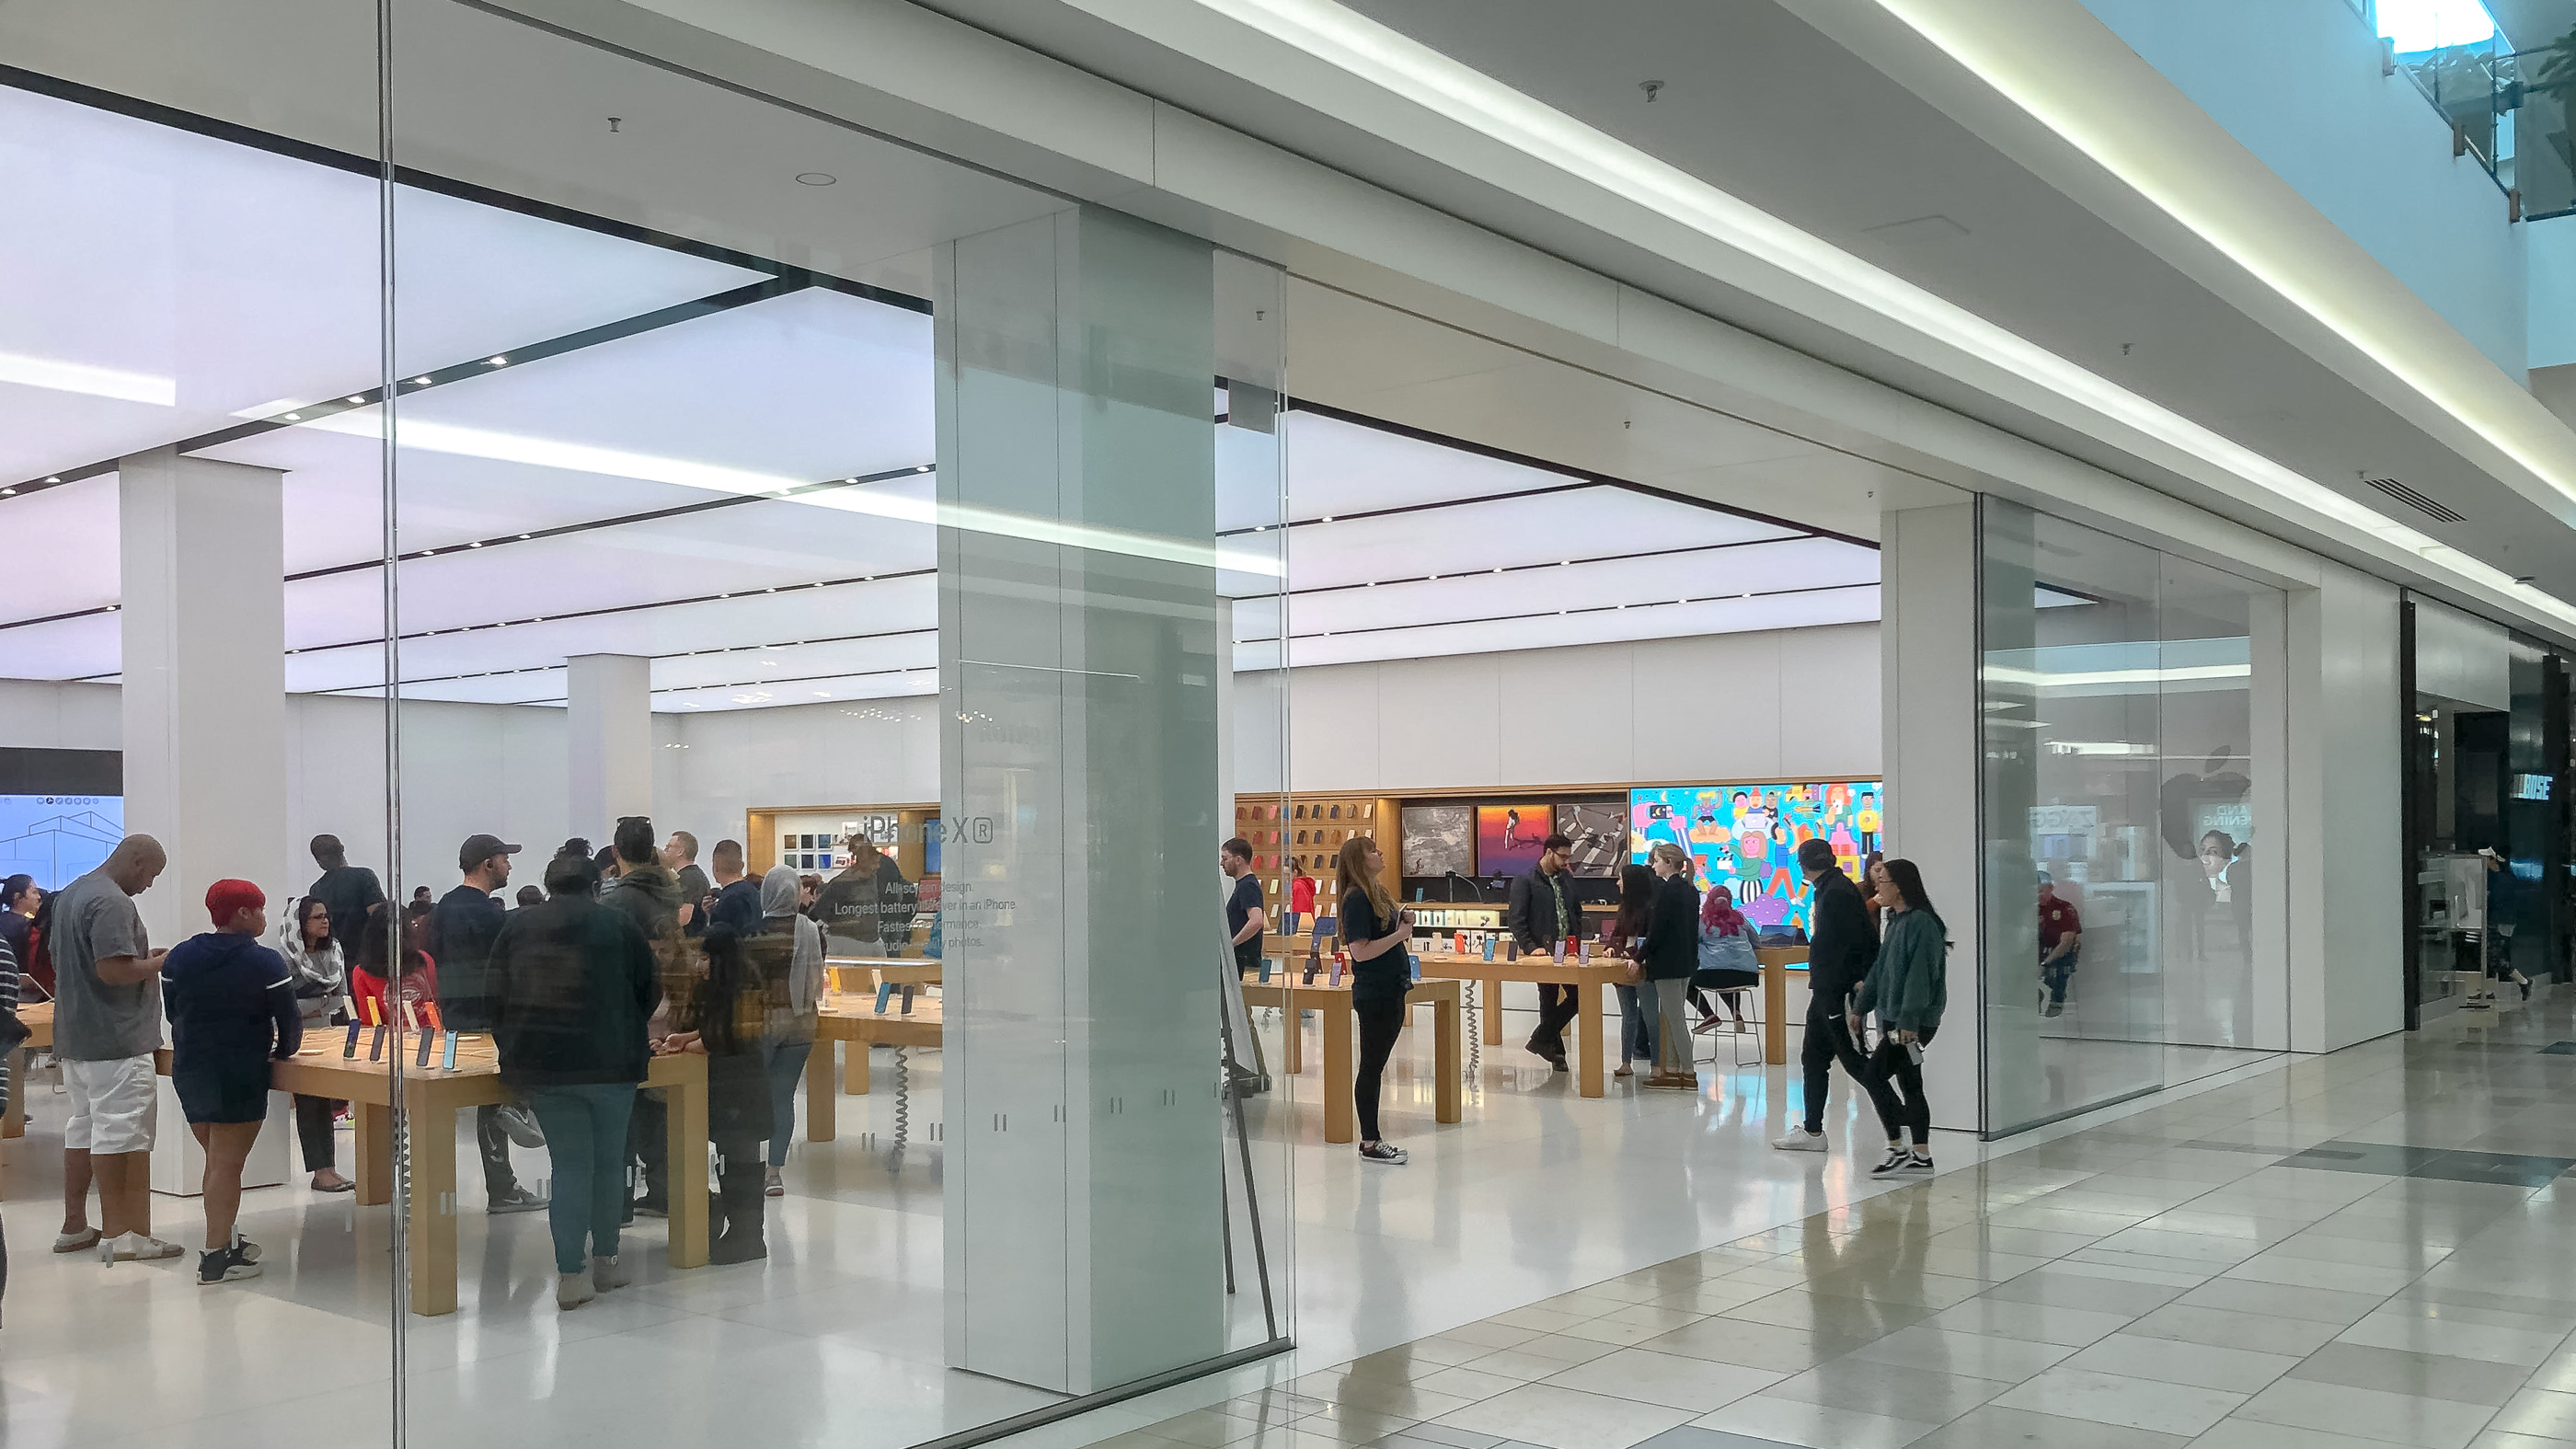 Fort Worth's Apple store has suddenly closed. Here's why